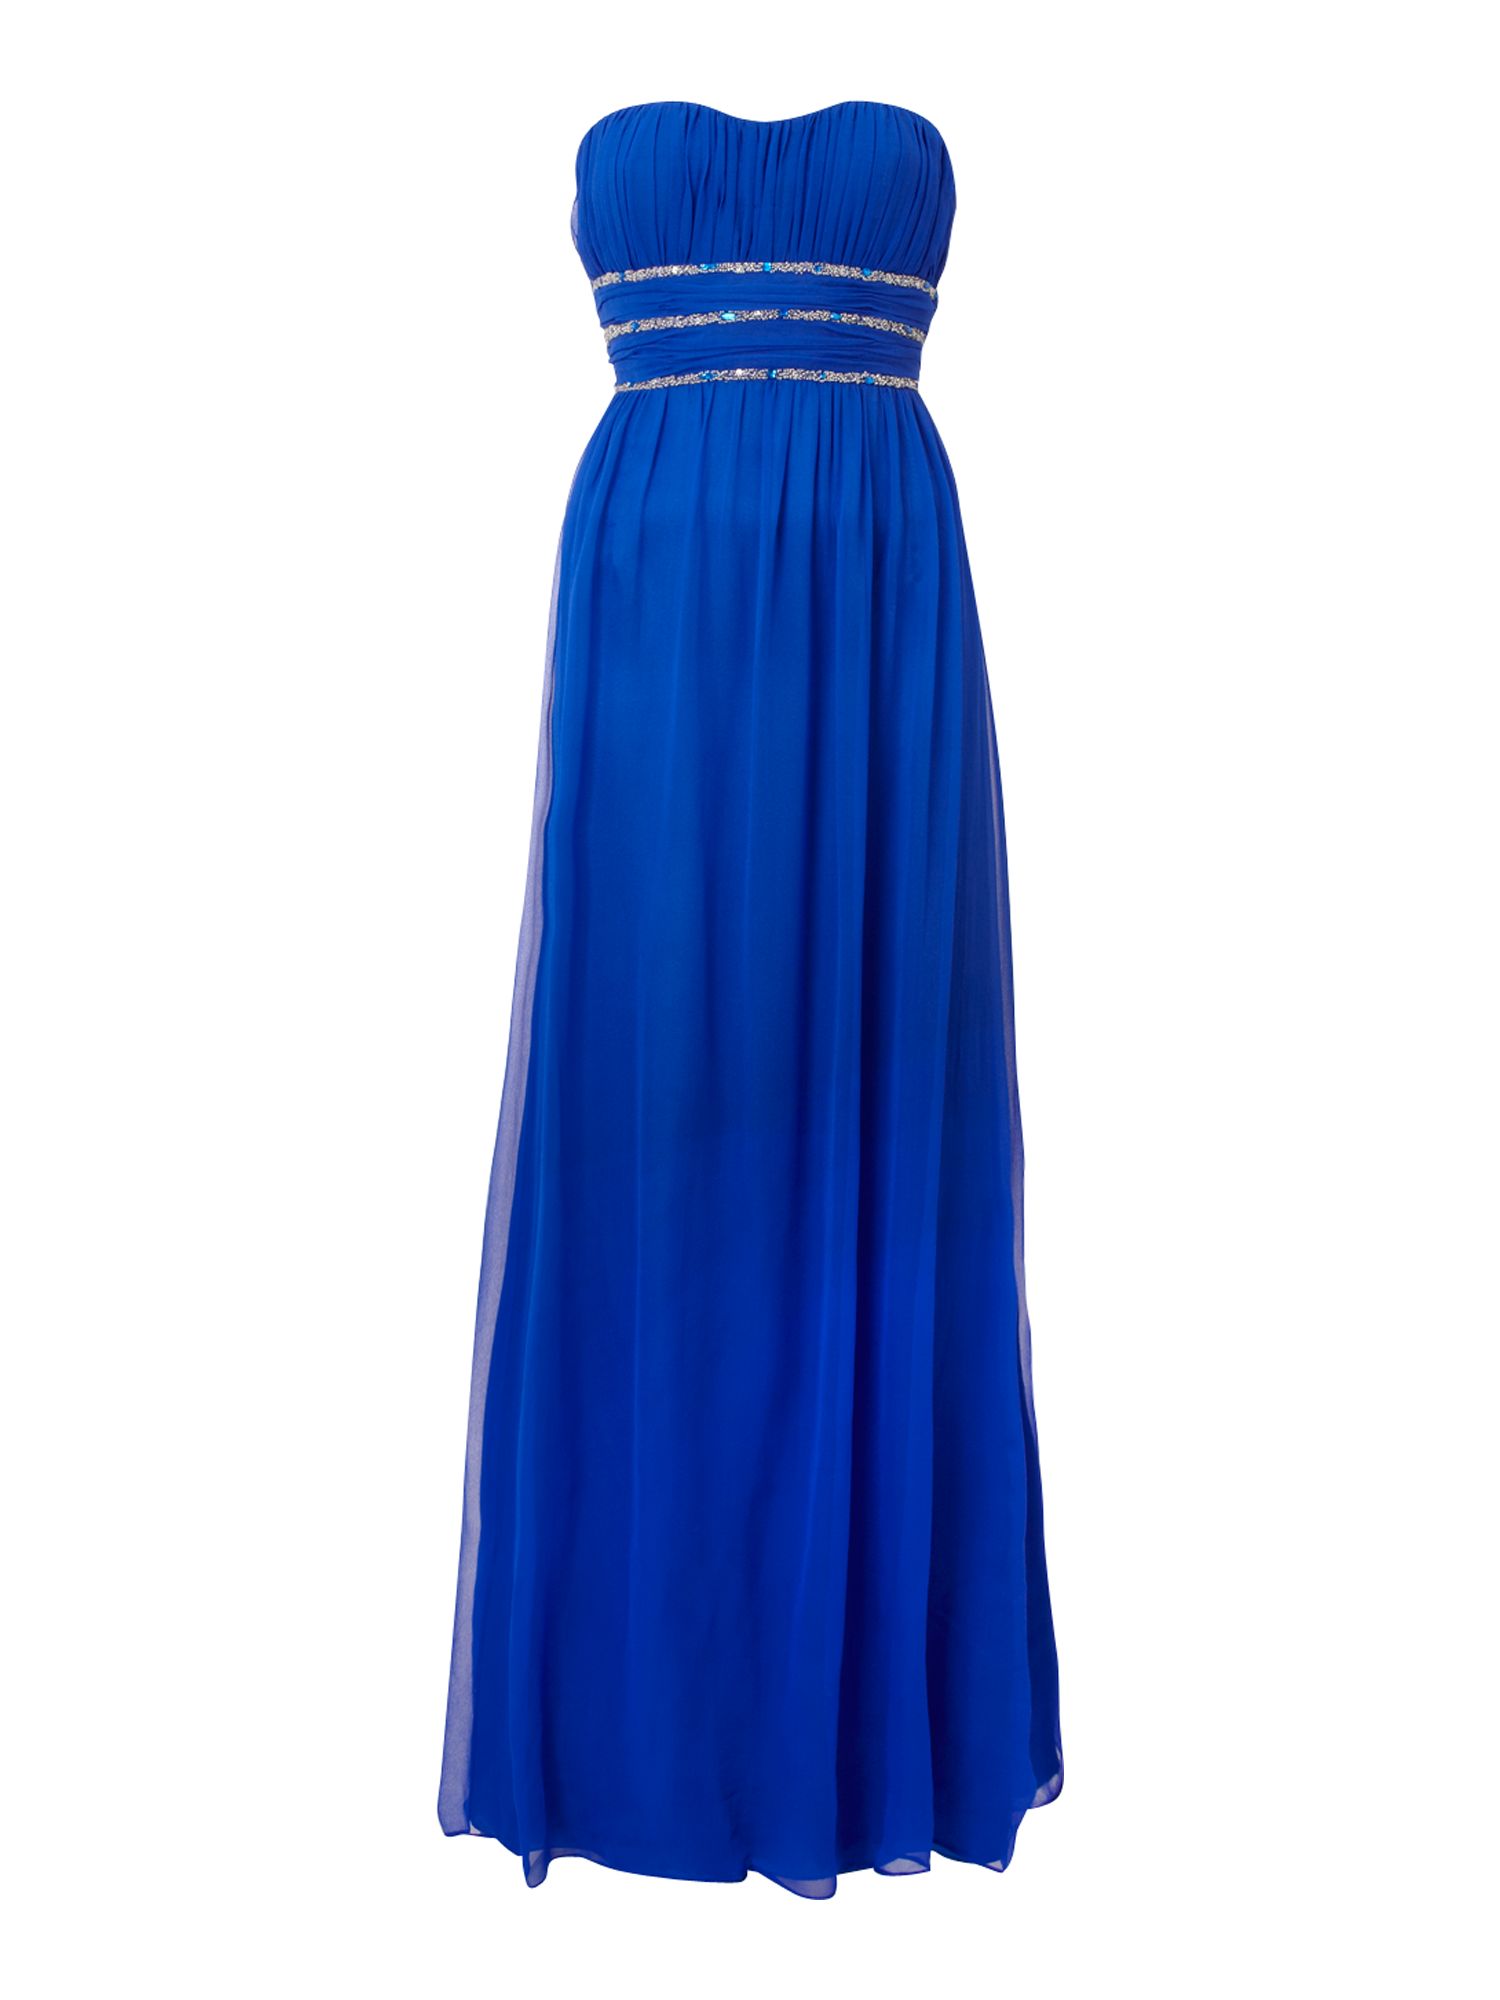 Js collections Strapless Beaded Waist Dress in Blue | Lyst